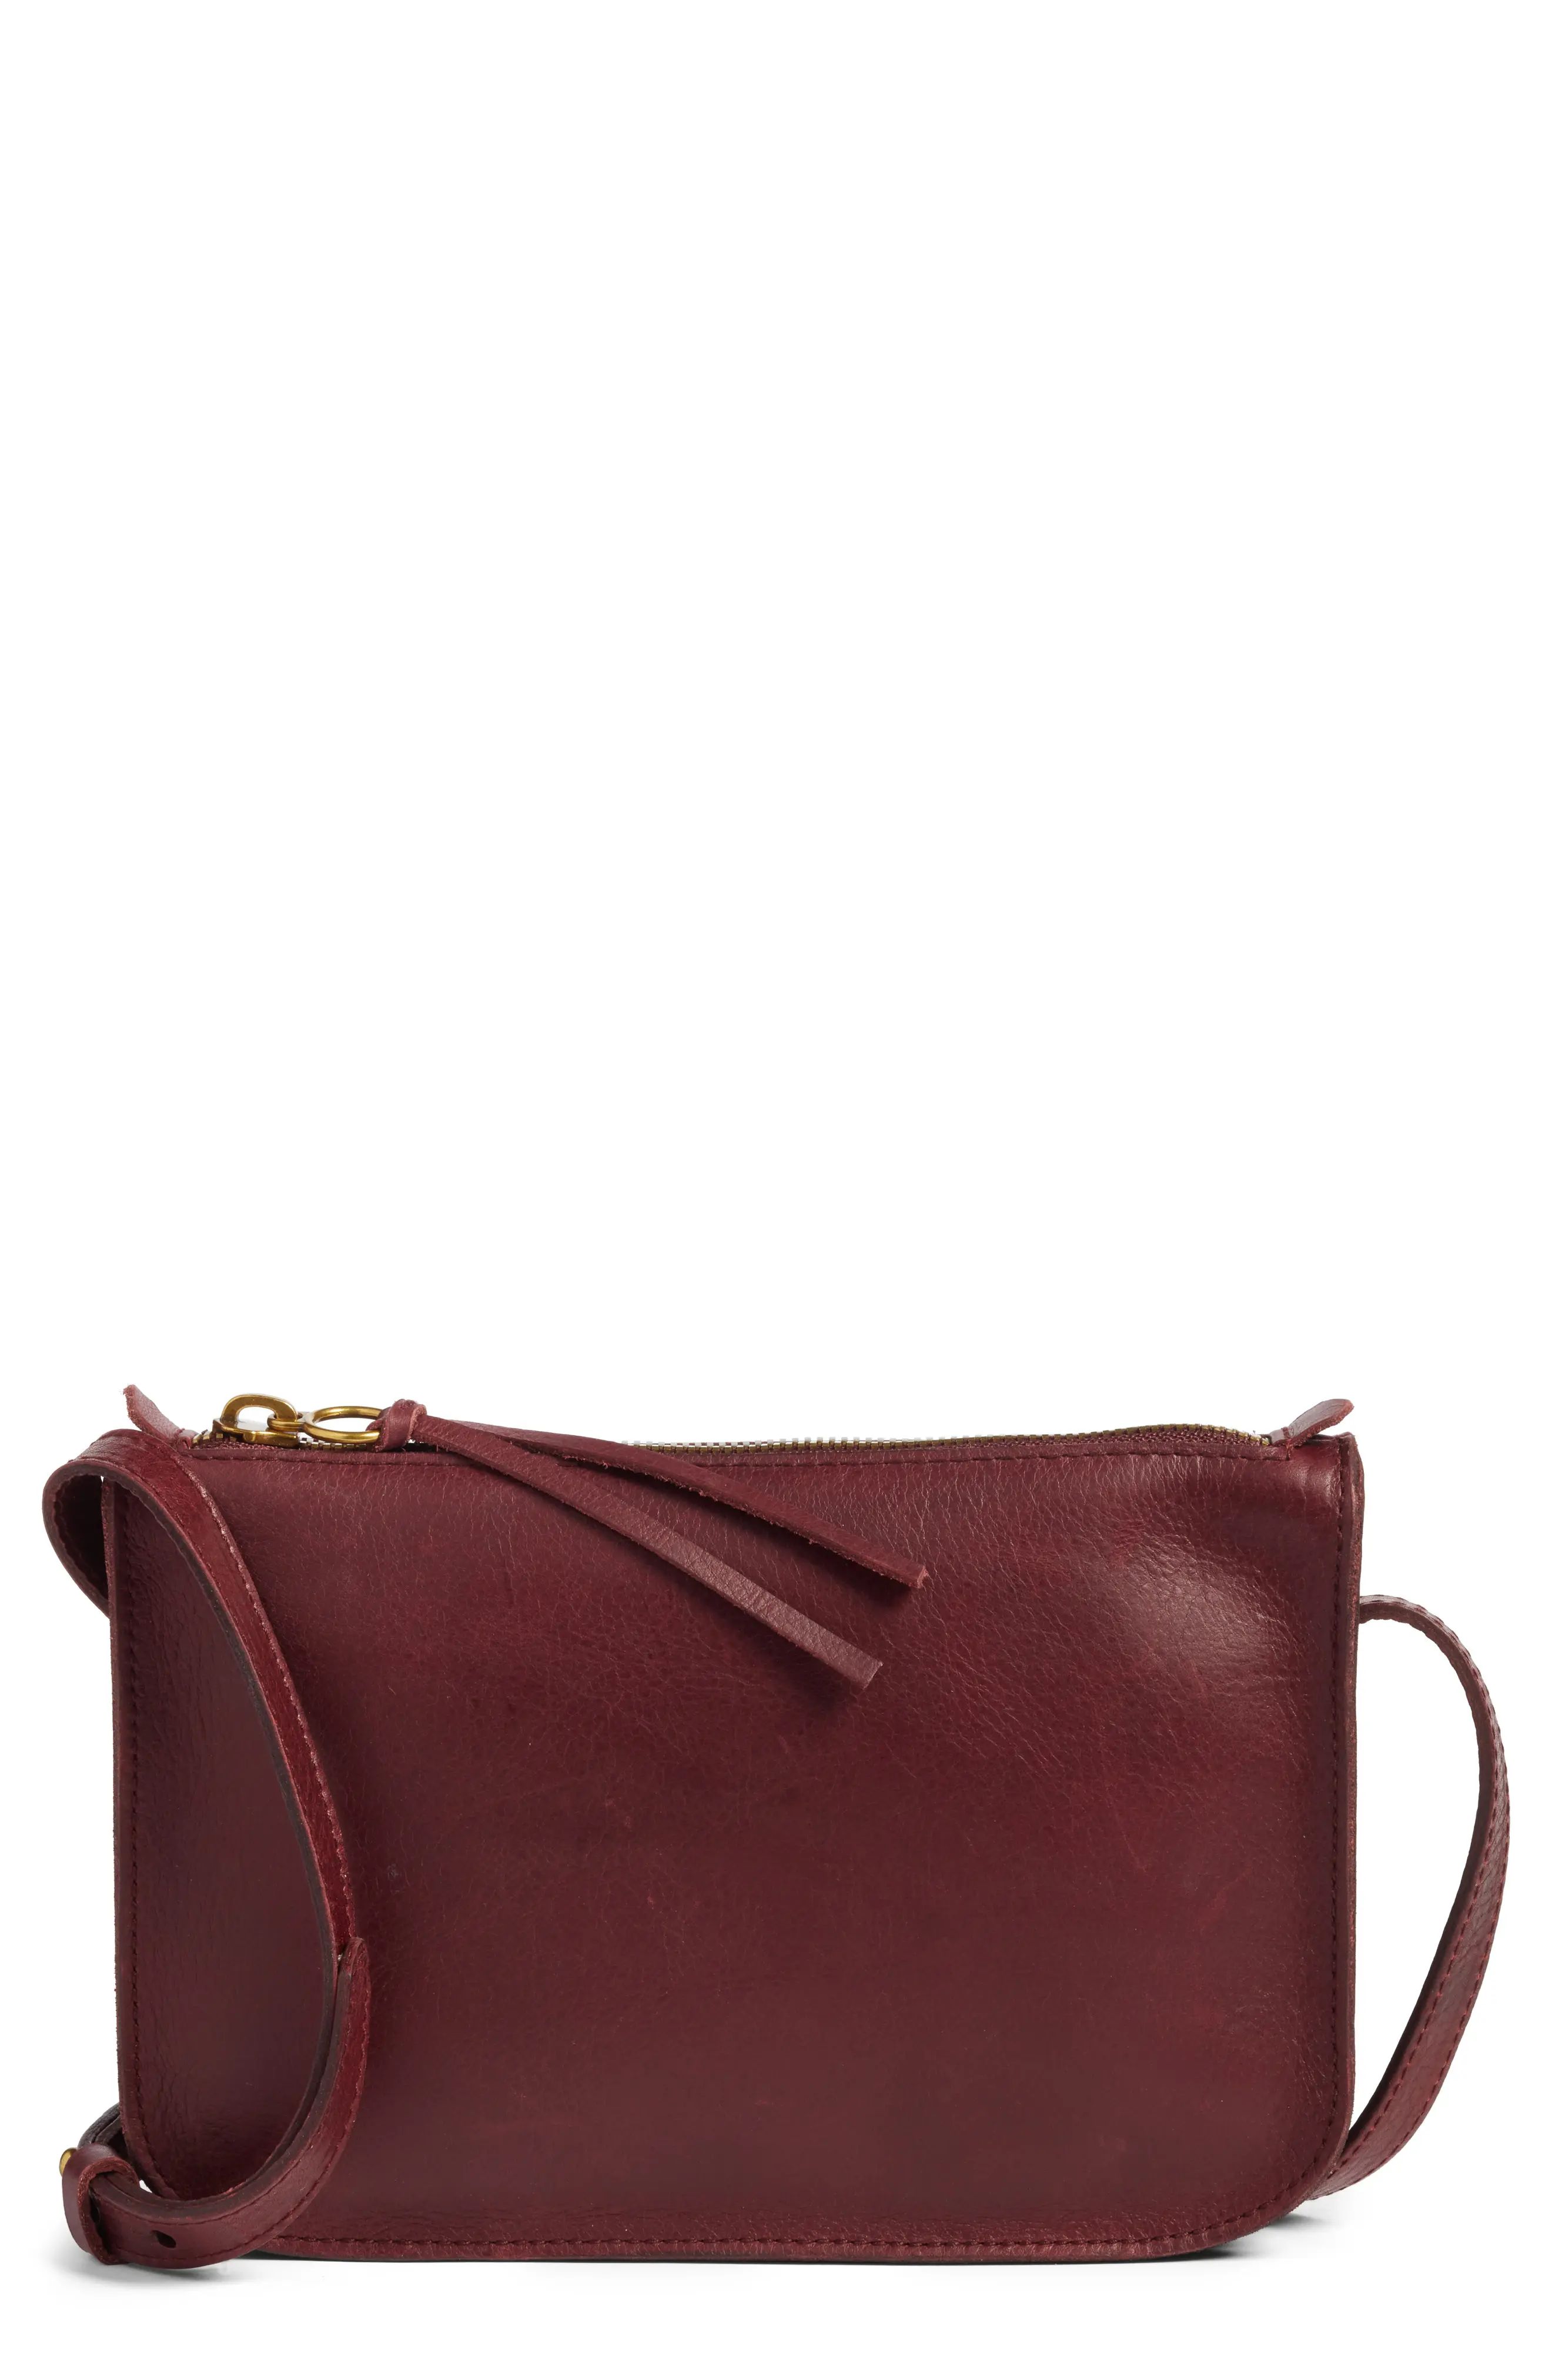 The Simple Leather Crossbody Bag | Nordstrom